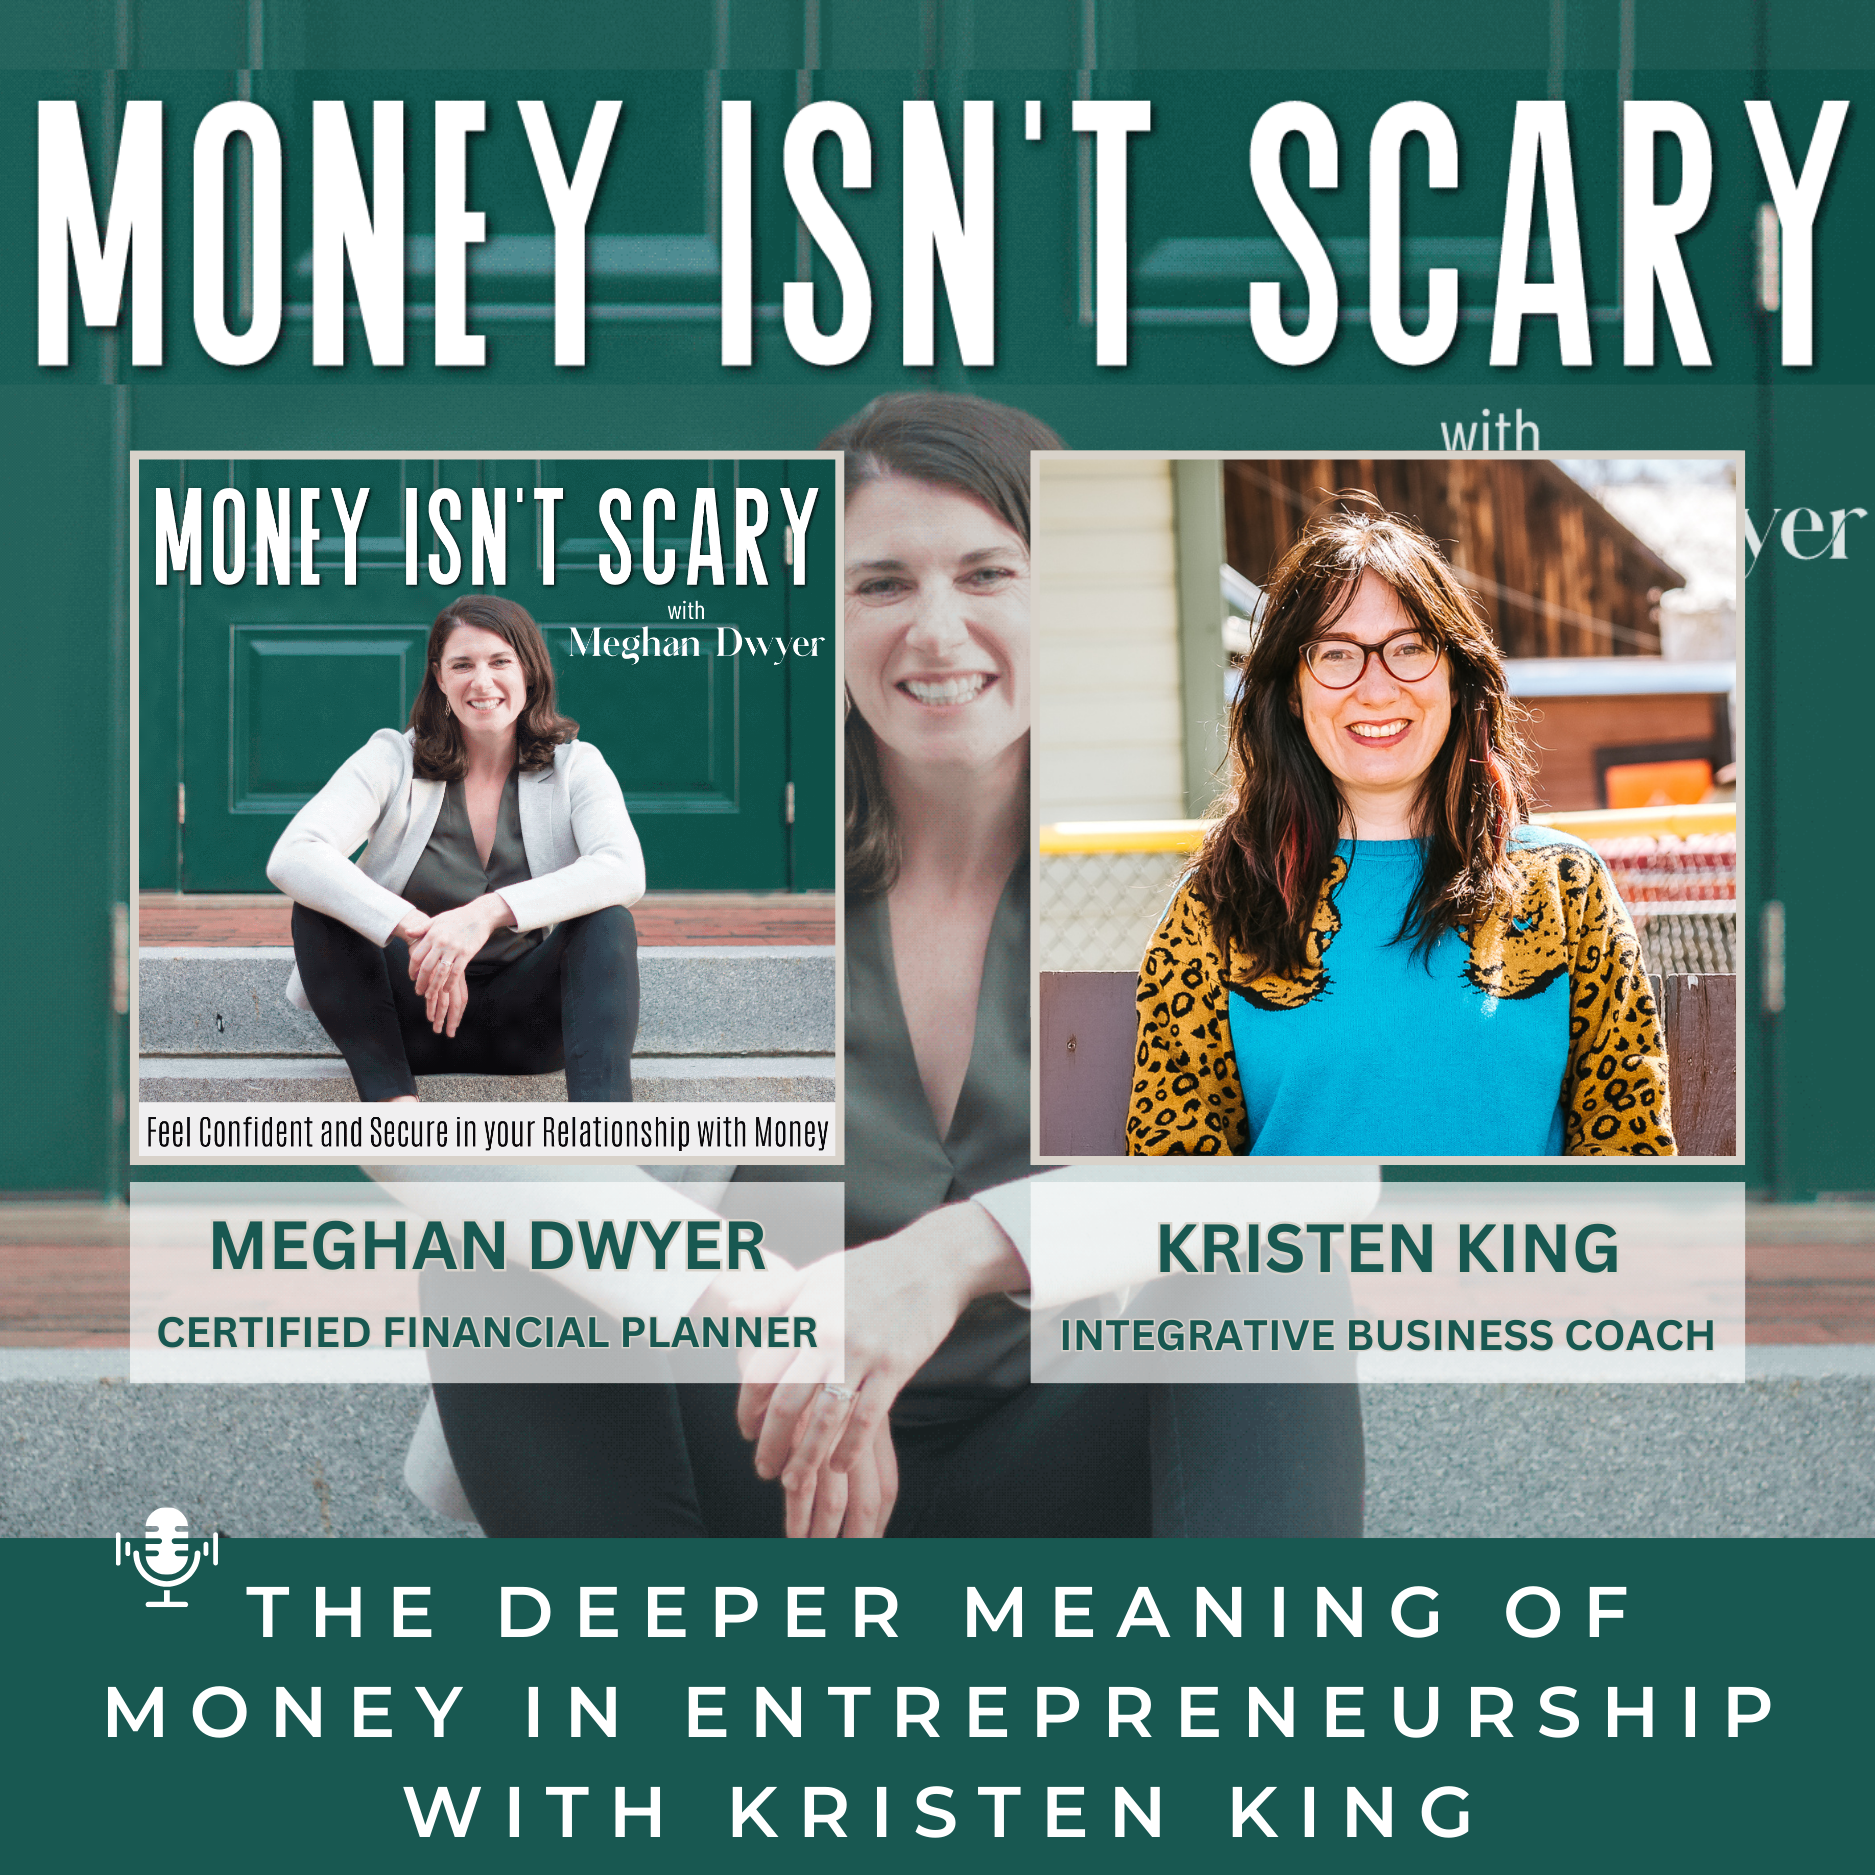 New Interview: The Deeper Meaning of Money in Entrepreneurship with Kristen King